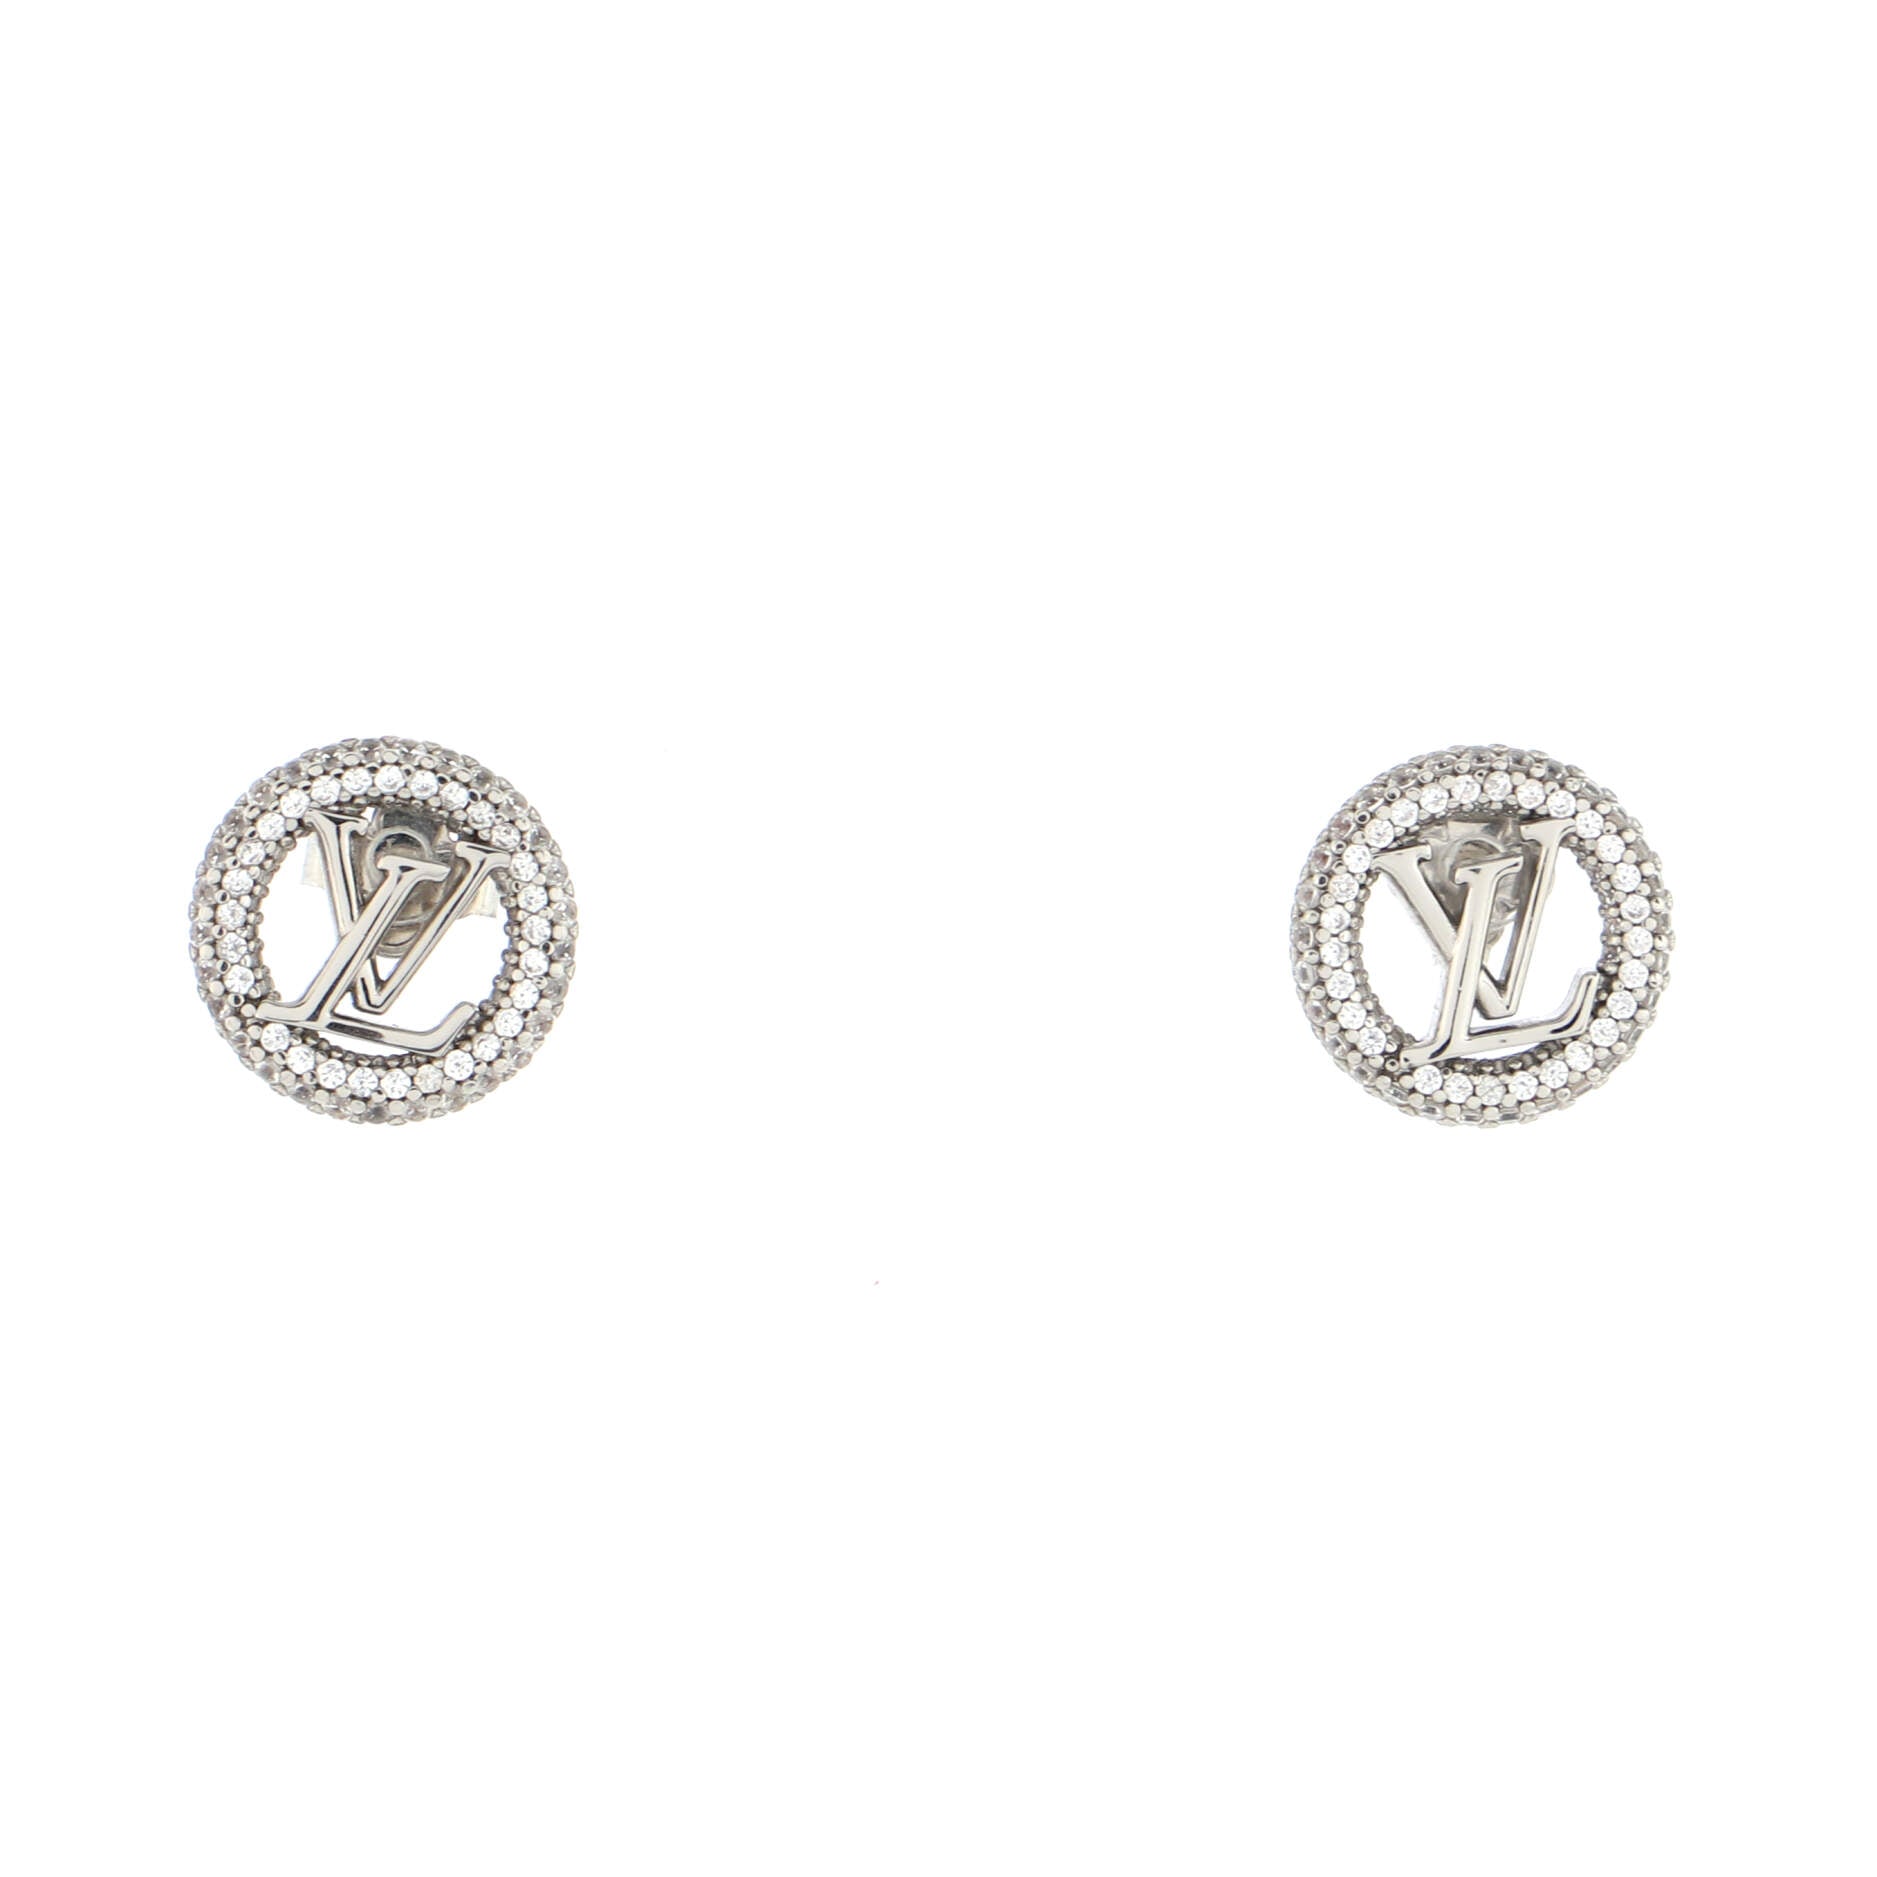 Louis Vuitton pre-owned 18kt Rose Gold Star Blossom Diamond Earrings -  Farfetch